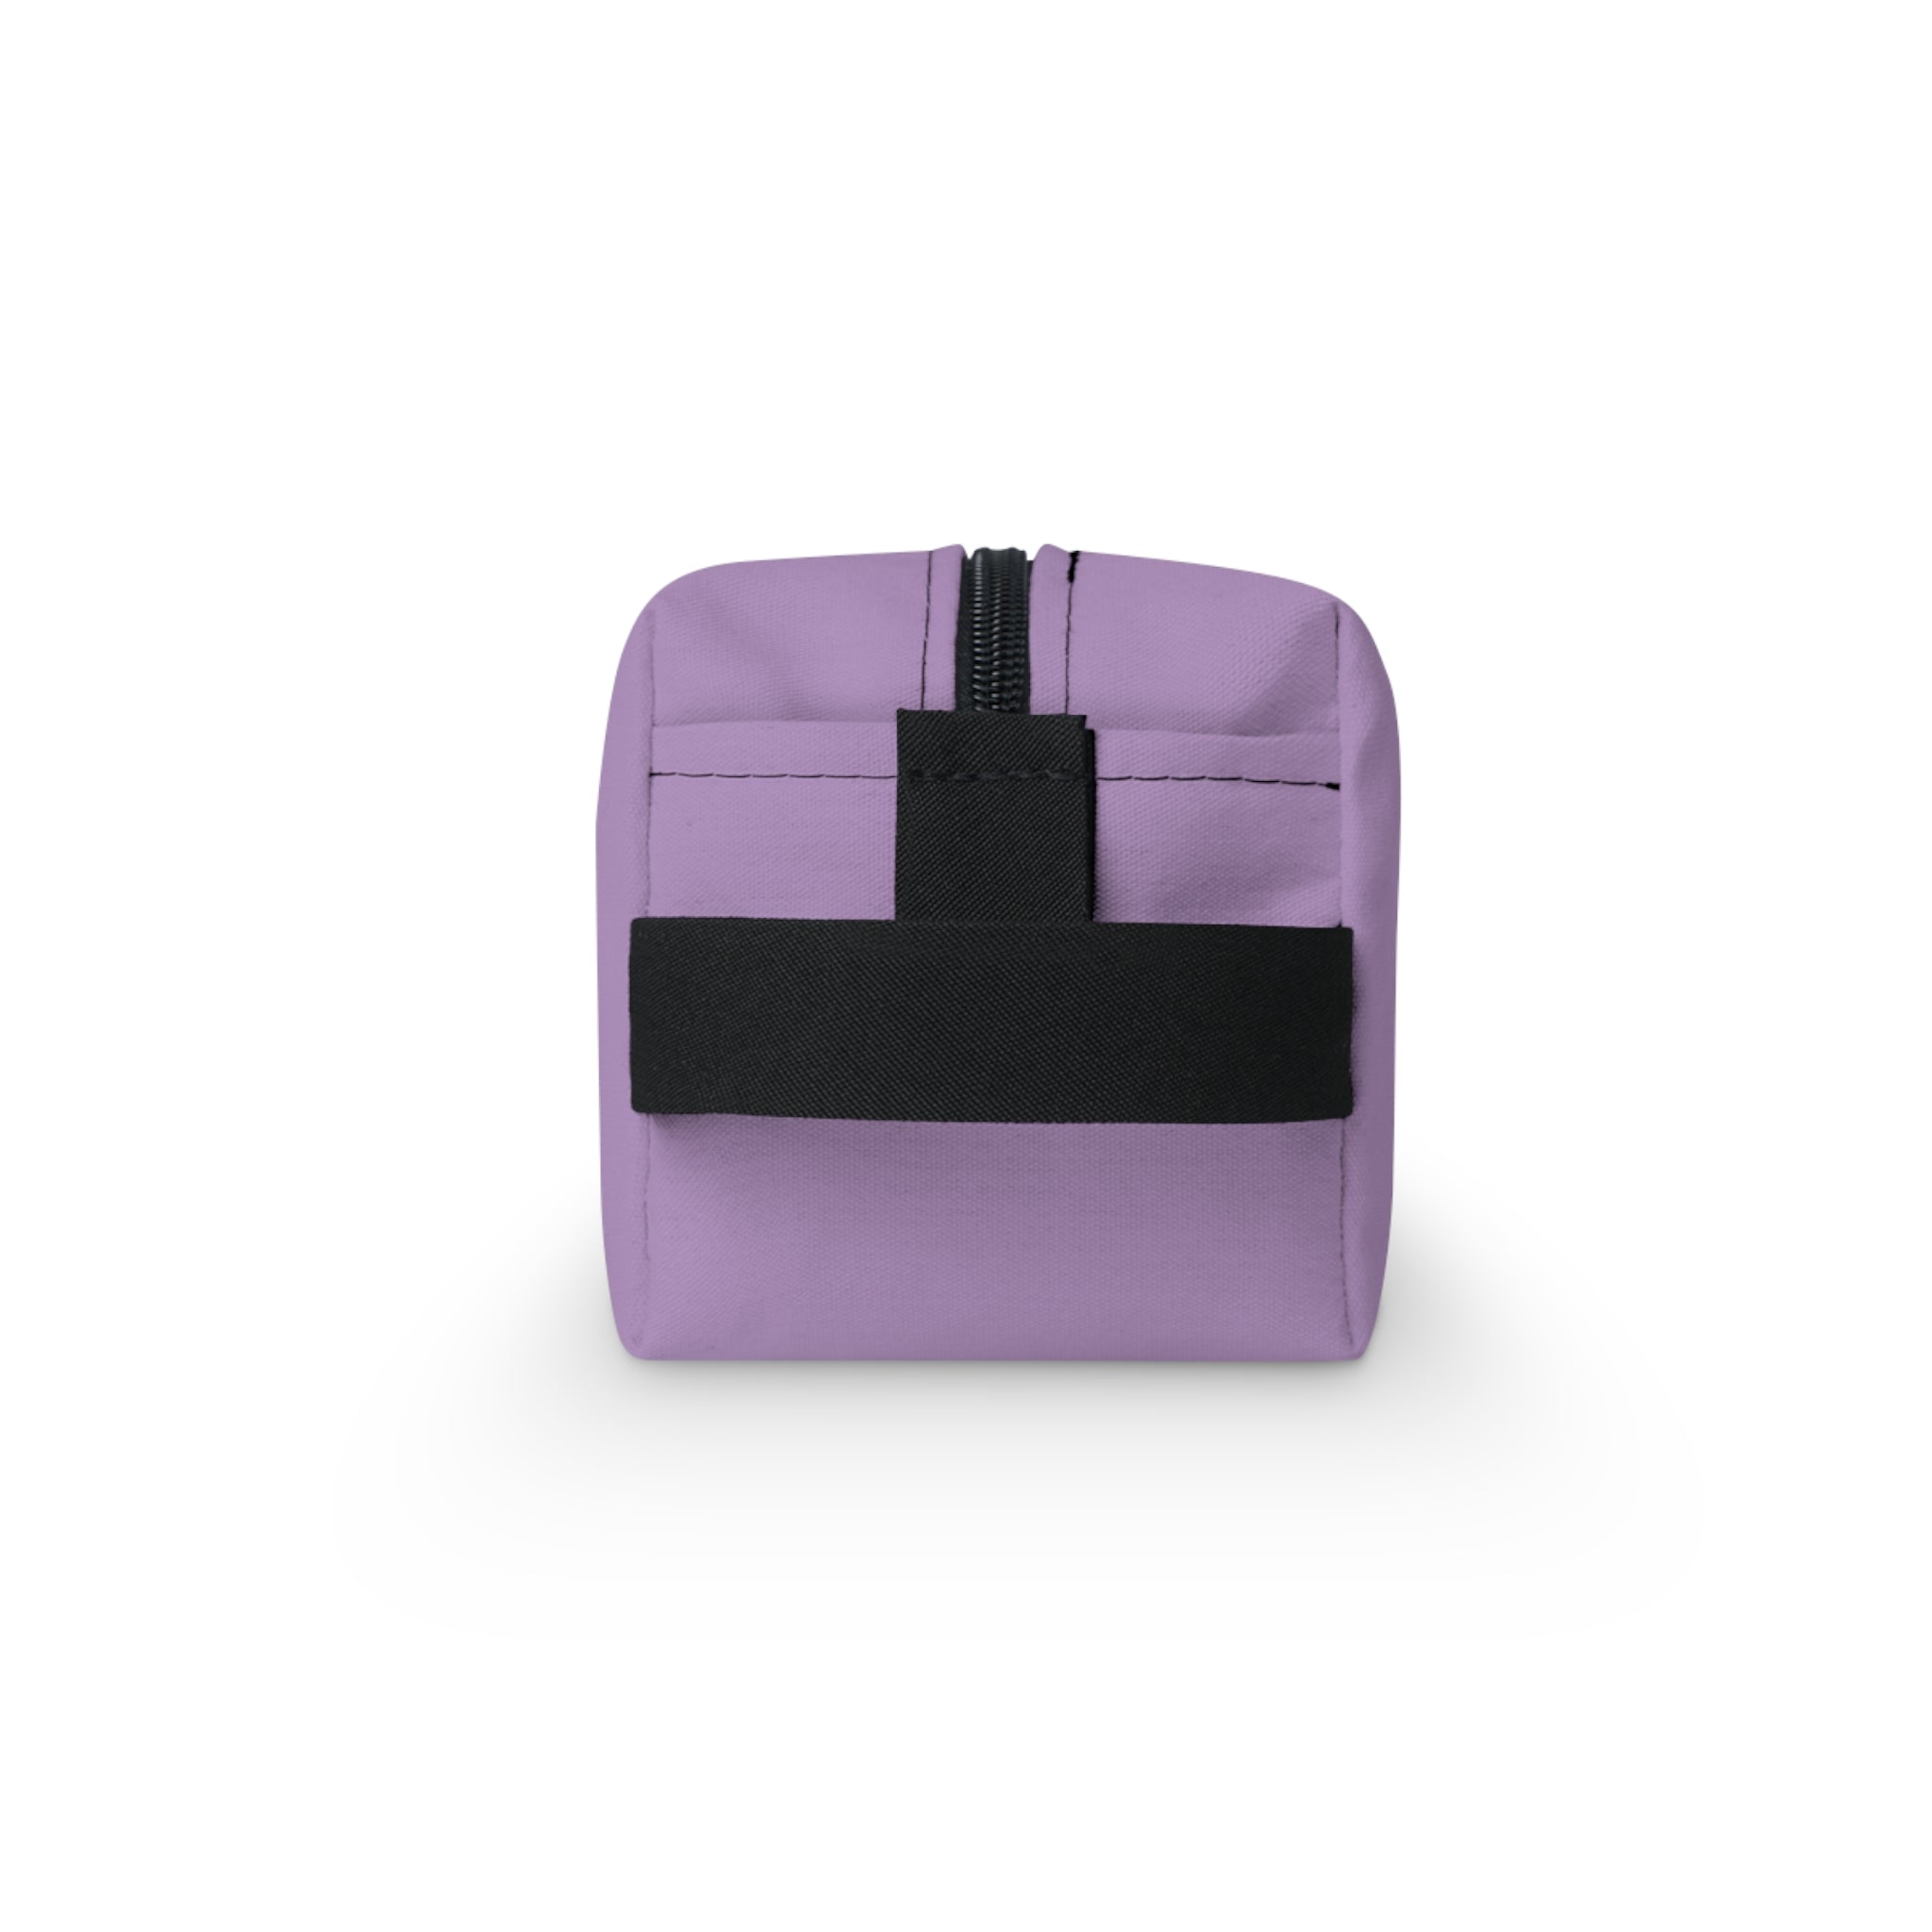 Travel Toiletry Pouch (Purple)